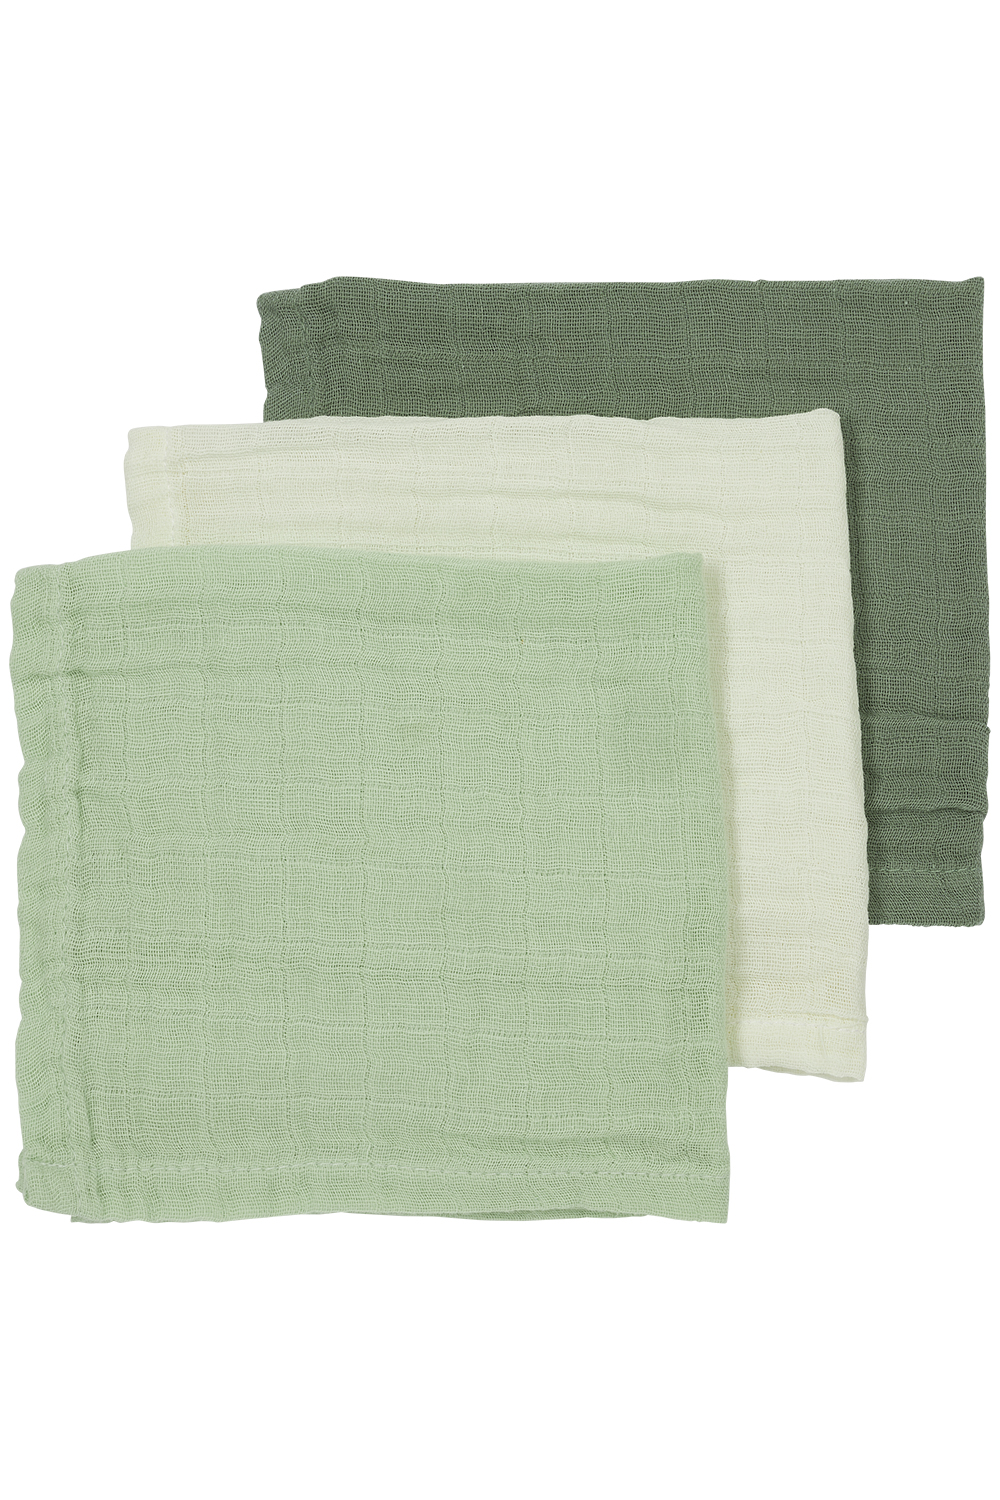 Facecloth 3-pack pre-washed muslin Uni - offwhite/soft green/forest green - 30x30cm